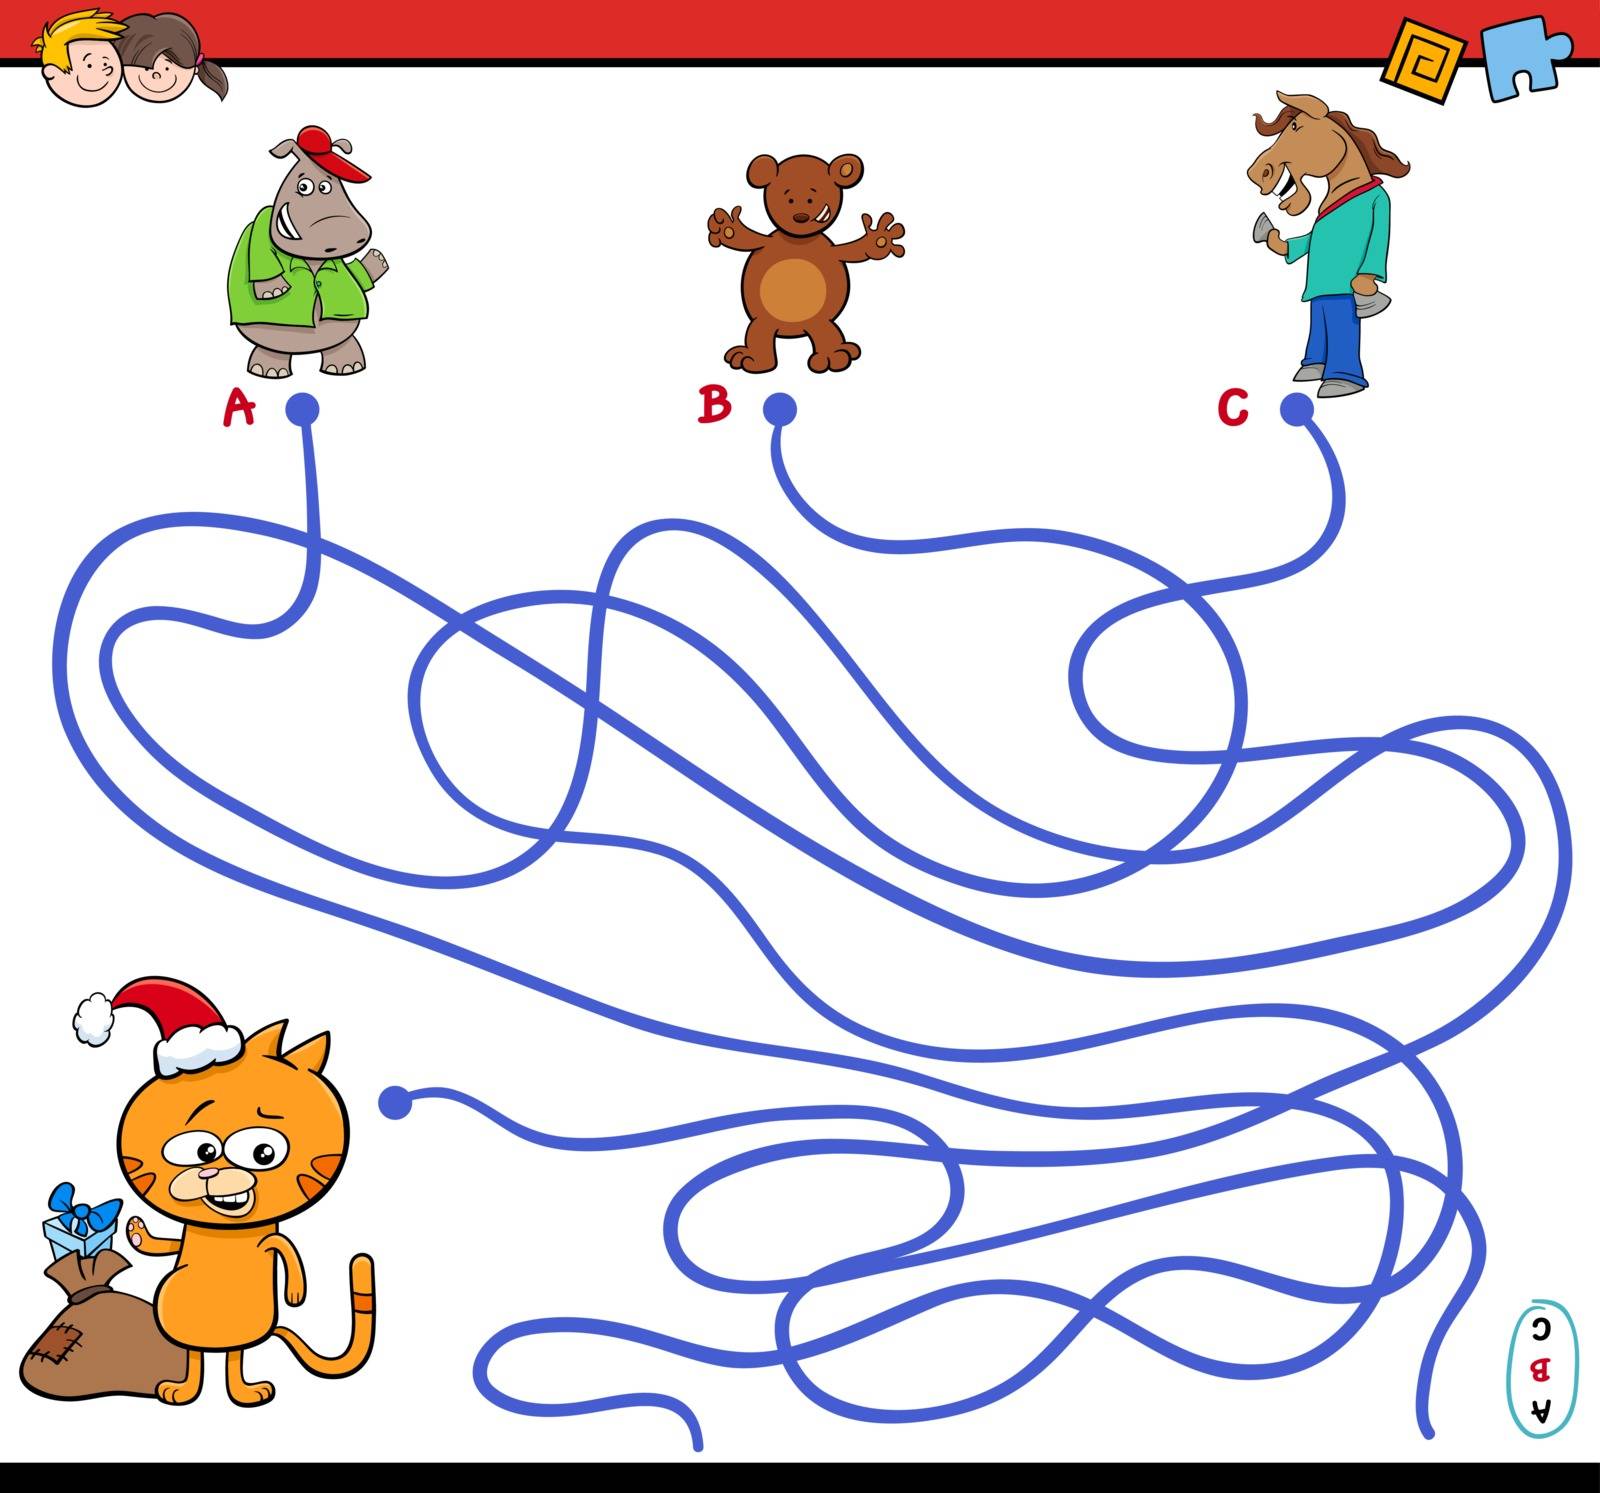 Cartoon Illustration of Paths or Maze Puzzle Activity Game with Animal Characters on Christmas Time